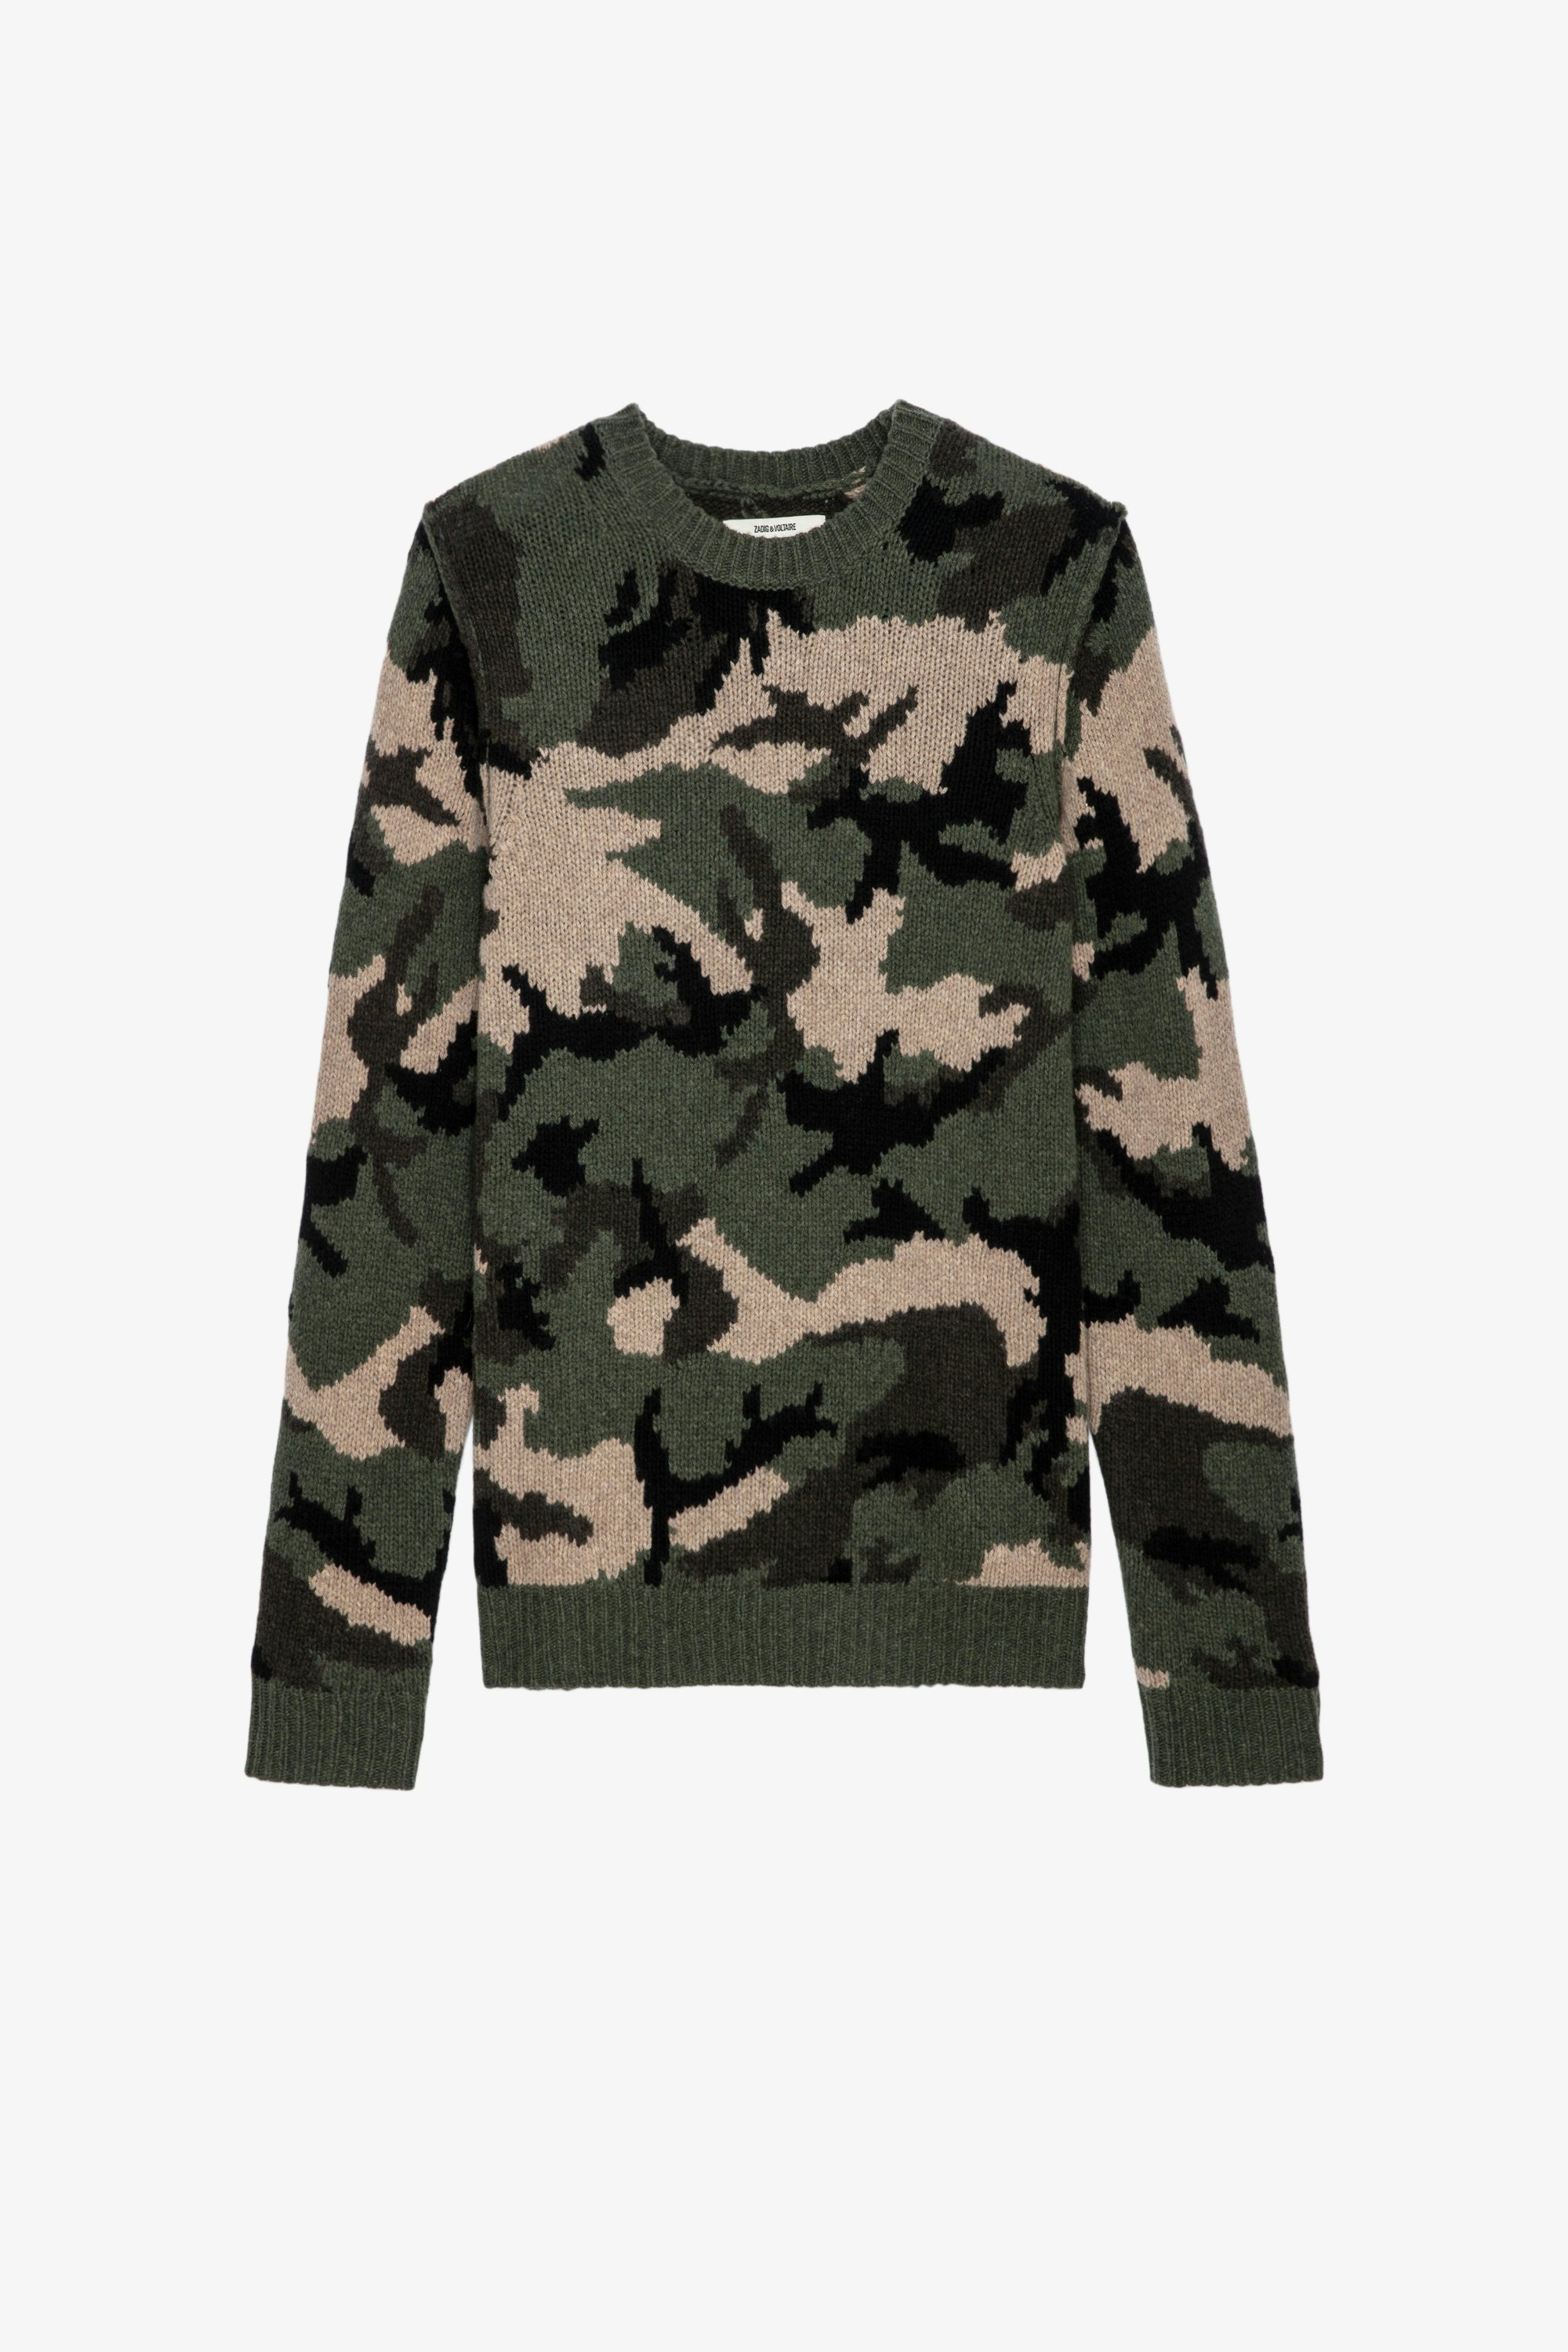 Kennedy Jumper Men’s khaki camouflage-print wool jumper with “Art is truth” slogan on the back